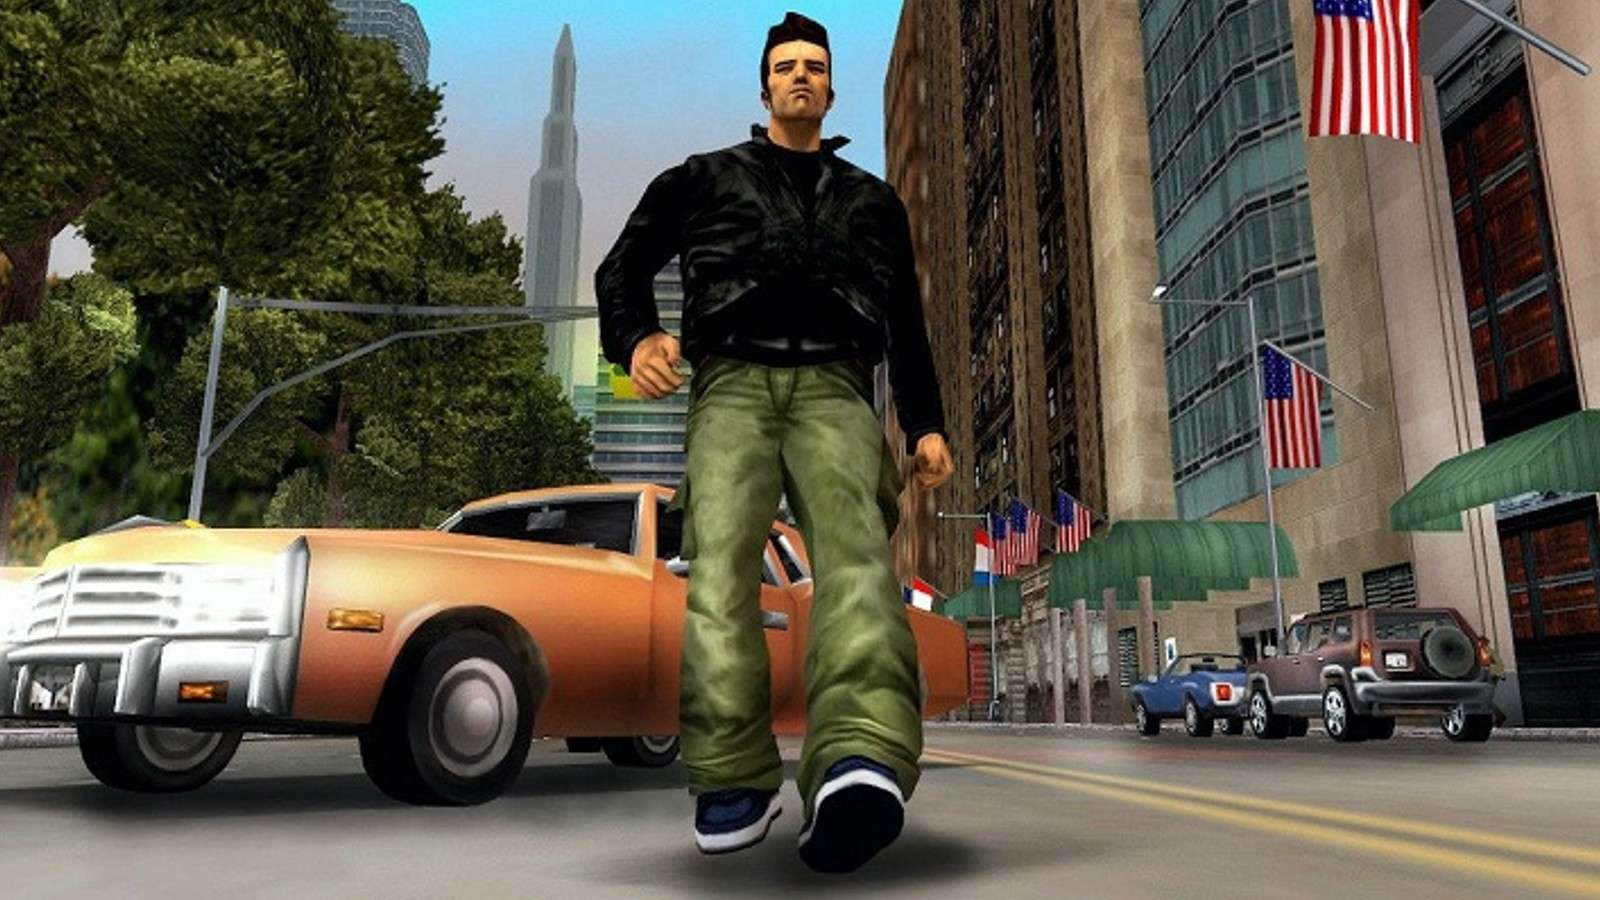 GTA Trilogy: The Definitive Edition's Claue taking on the streets of Liberty City.